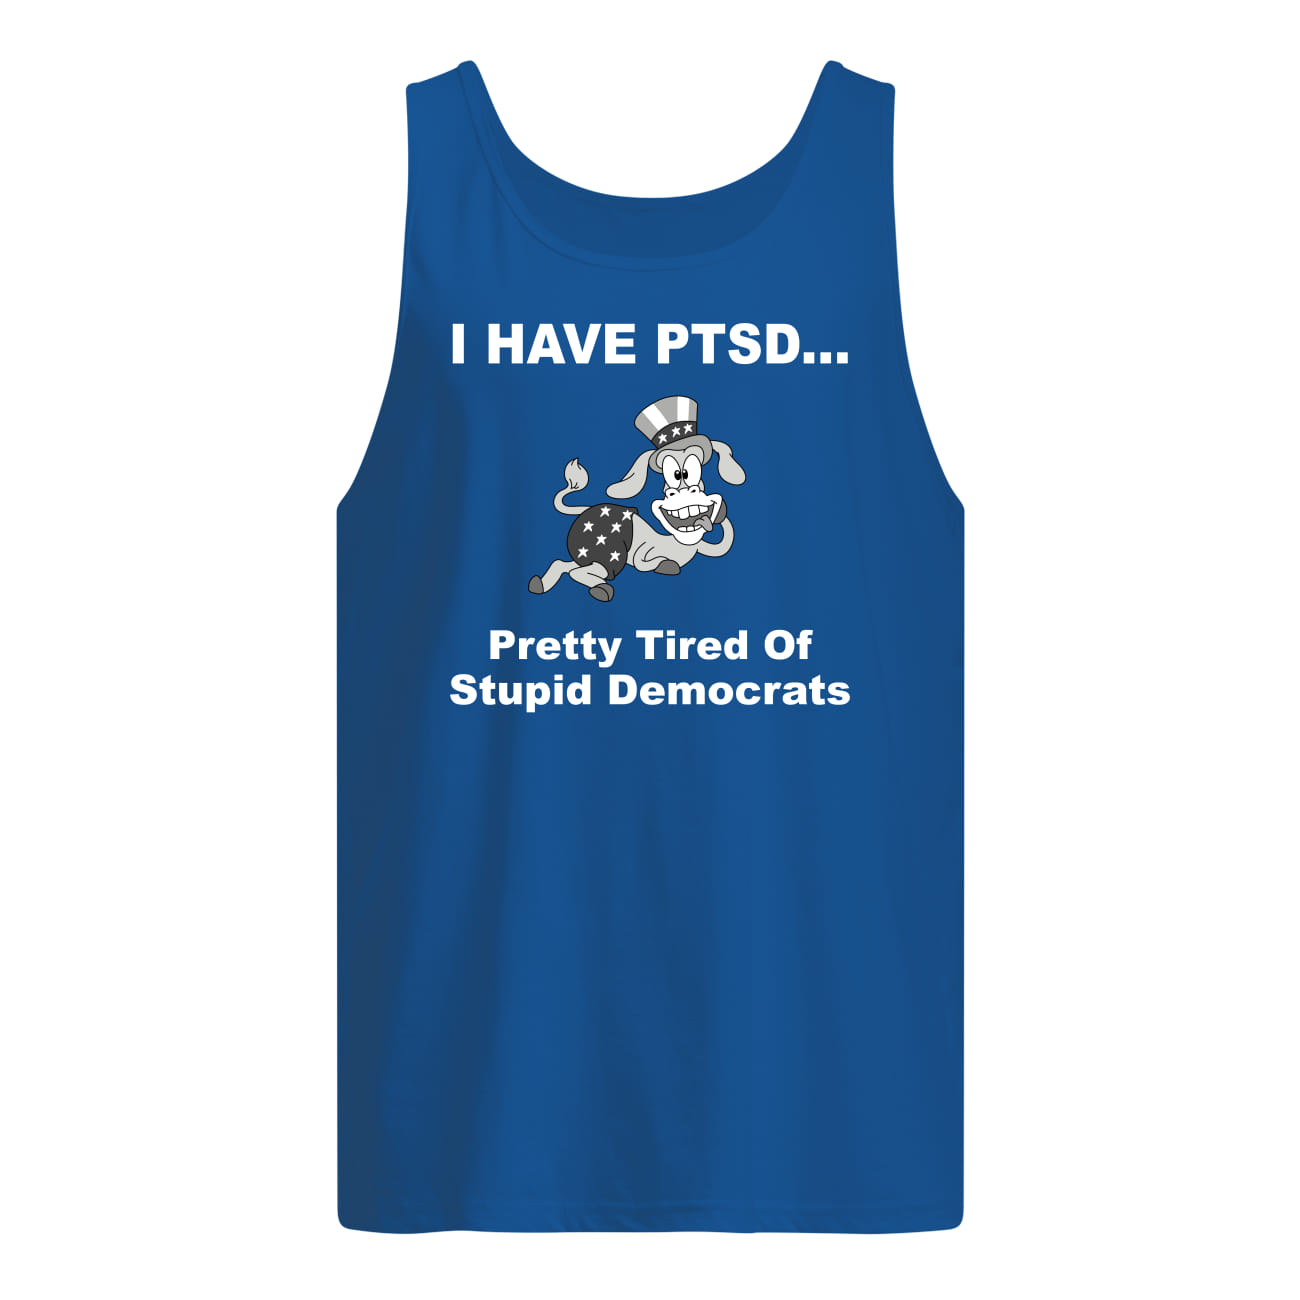 I have ptsd pretty tired or stupid democrats tank top